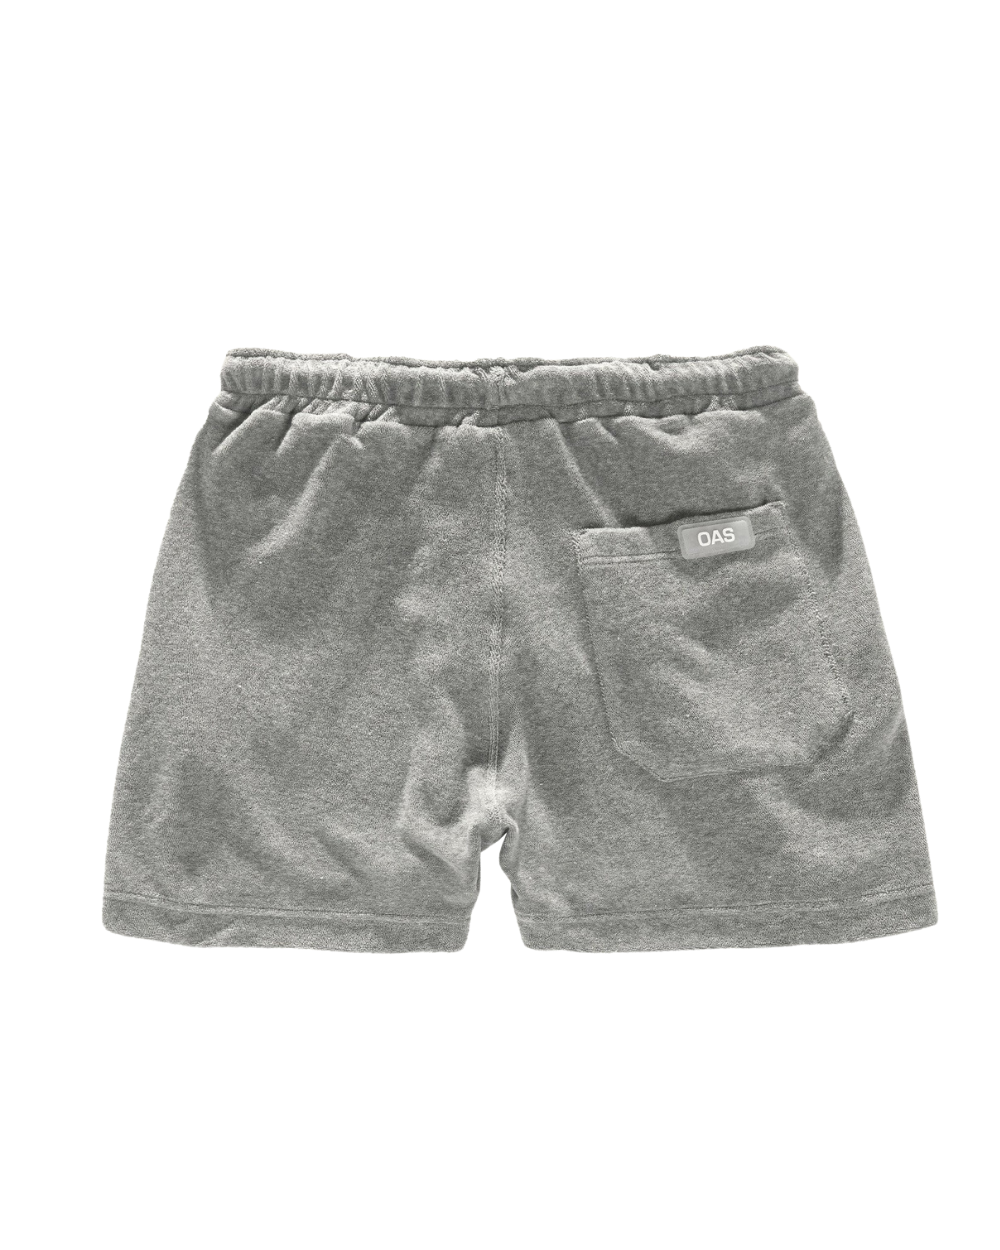 OAS Terry Shorts-Grey-50% OFF